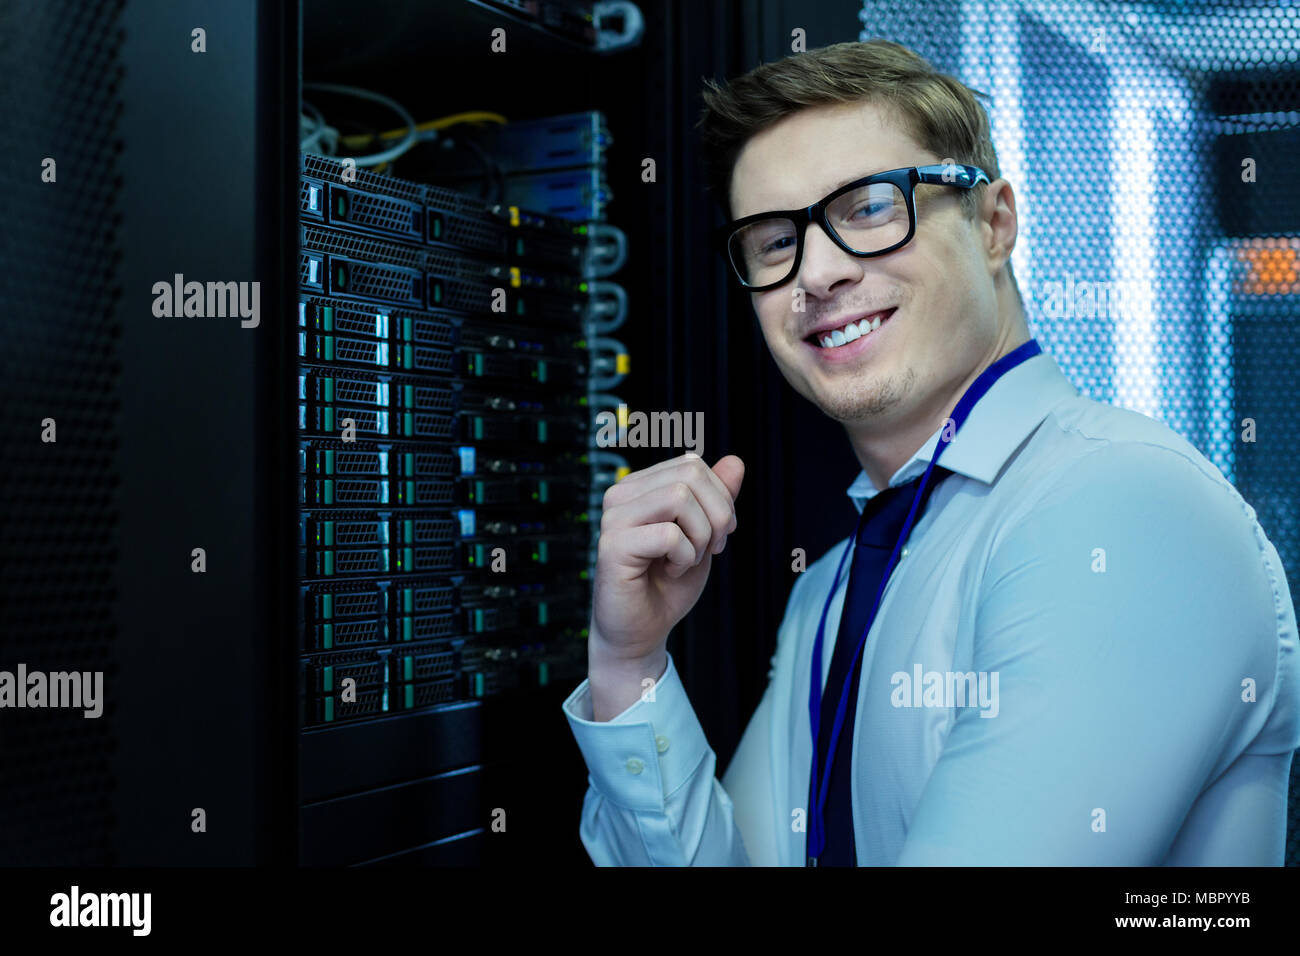 Smiling operator working in the data centre Stock Photo